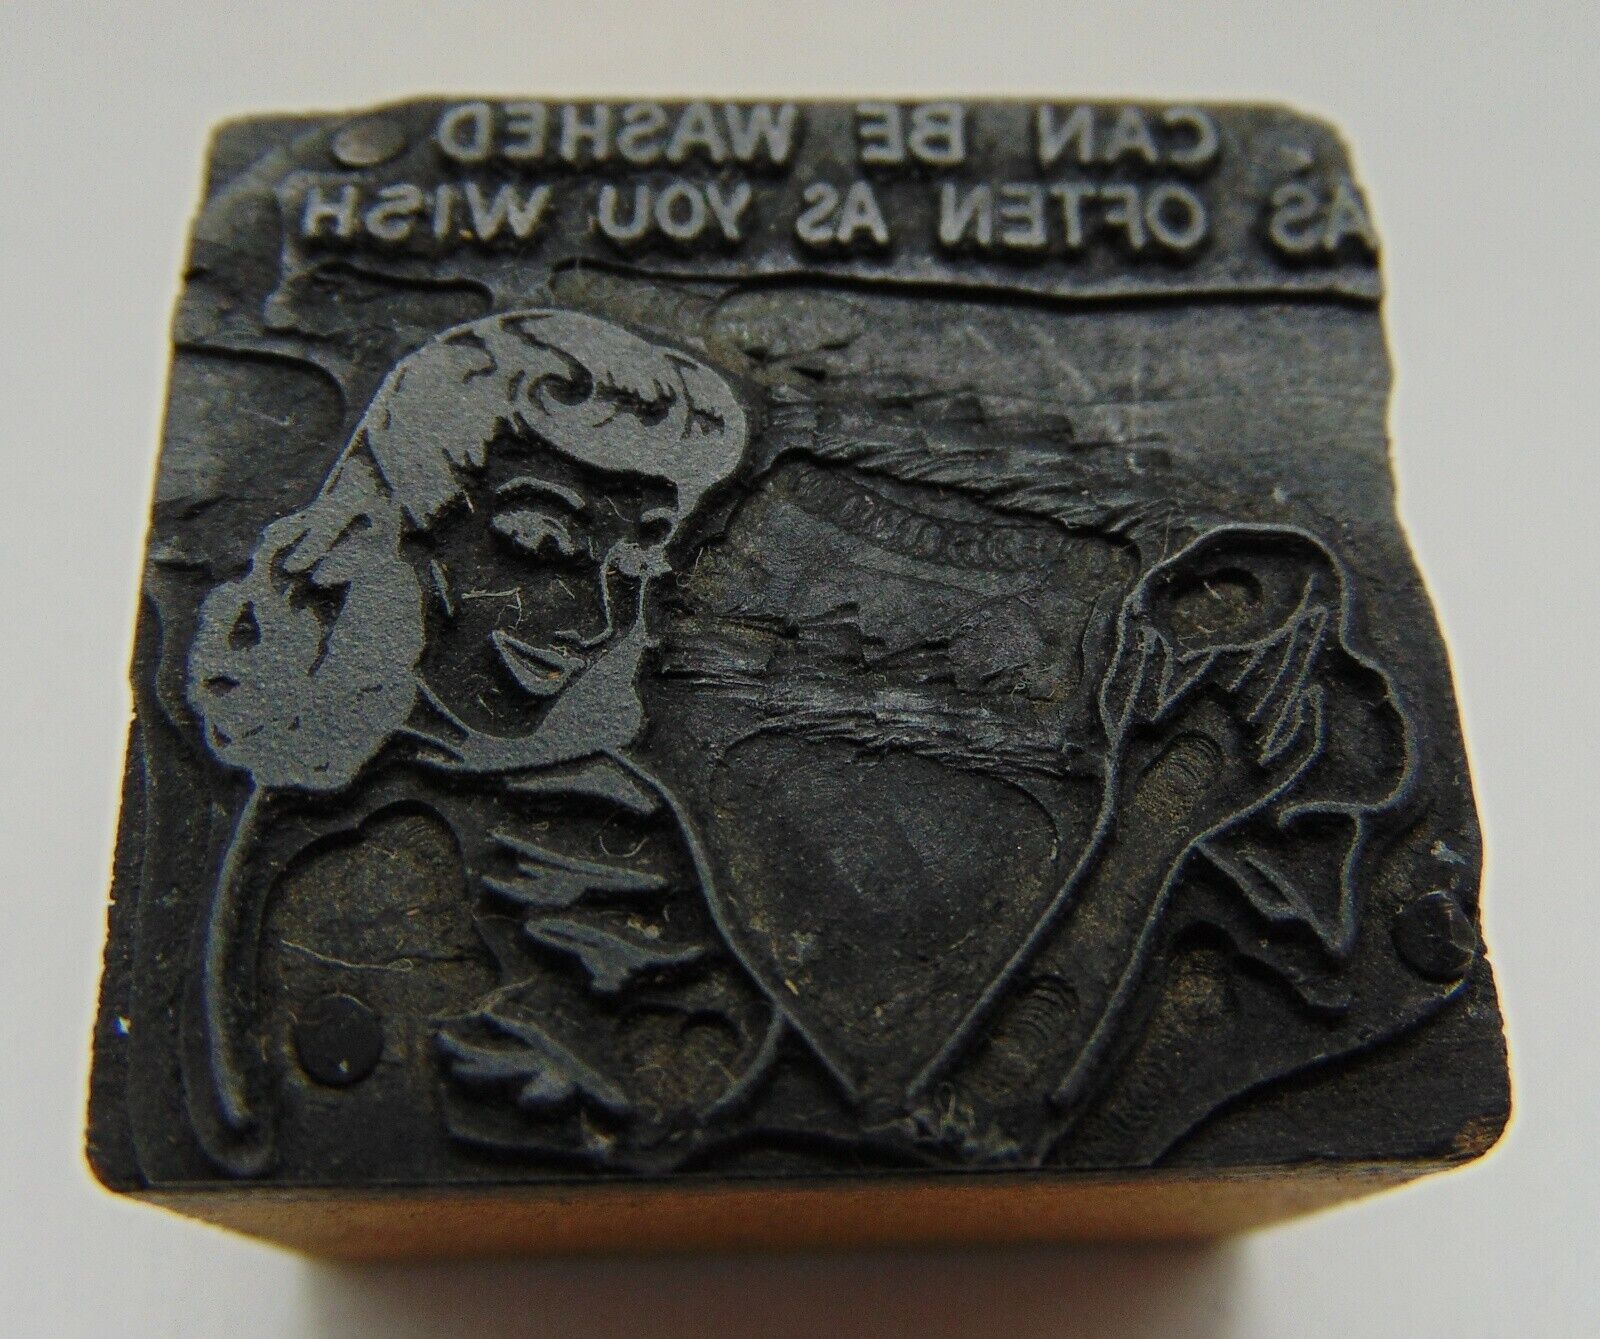 Vintage Printing Letterpress Printers Block Can Be Washed As Often As You Like